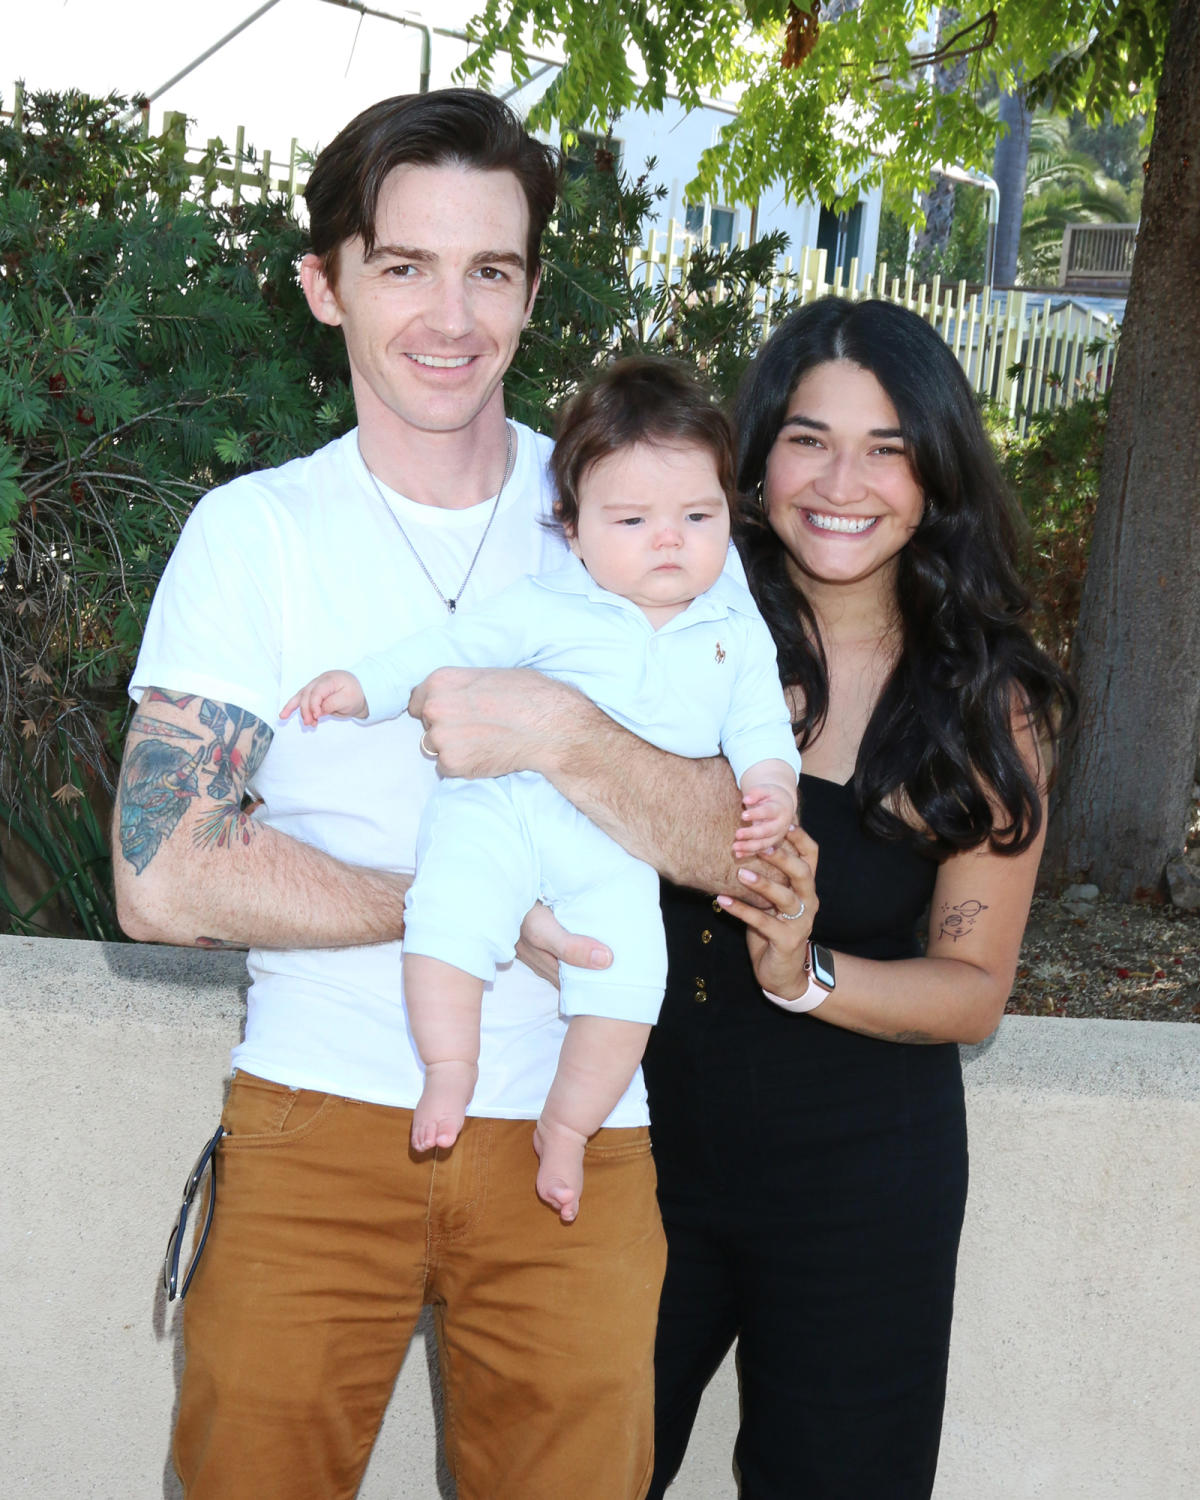 Drake Bell Sparked ‘Concern’ With Family Members Before He Was Reported